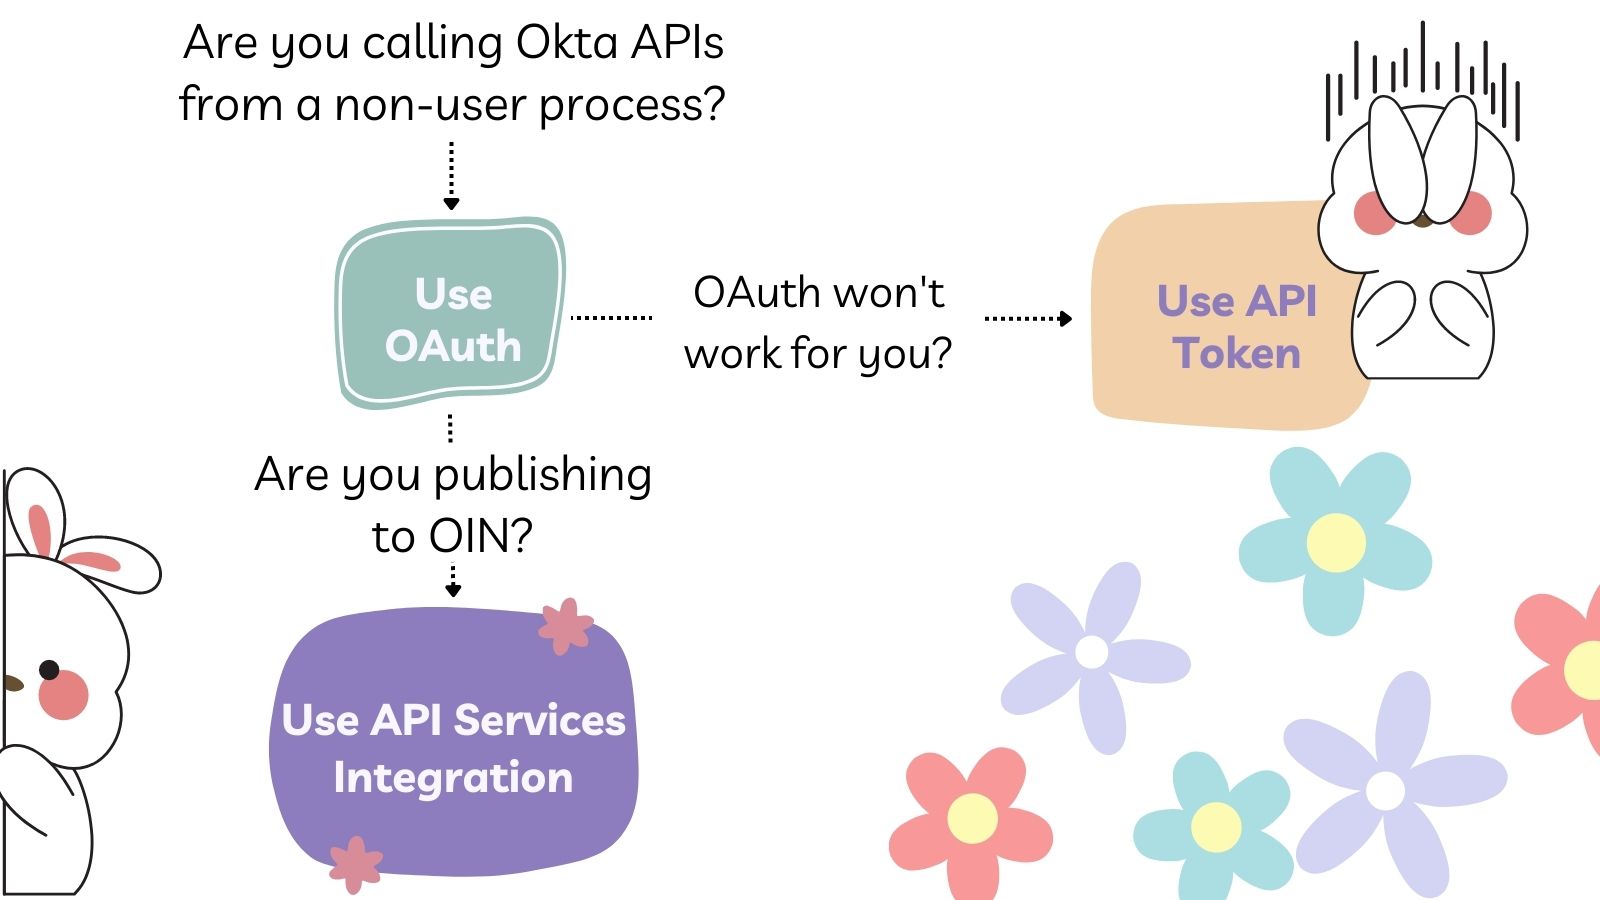 Flowchart describing first using OAuth, then using  API Services Integration in cases of OIN application. Lastly use an API Token if there are no other options.